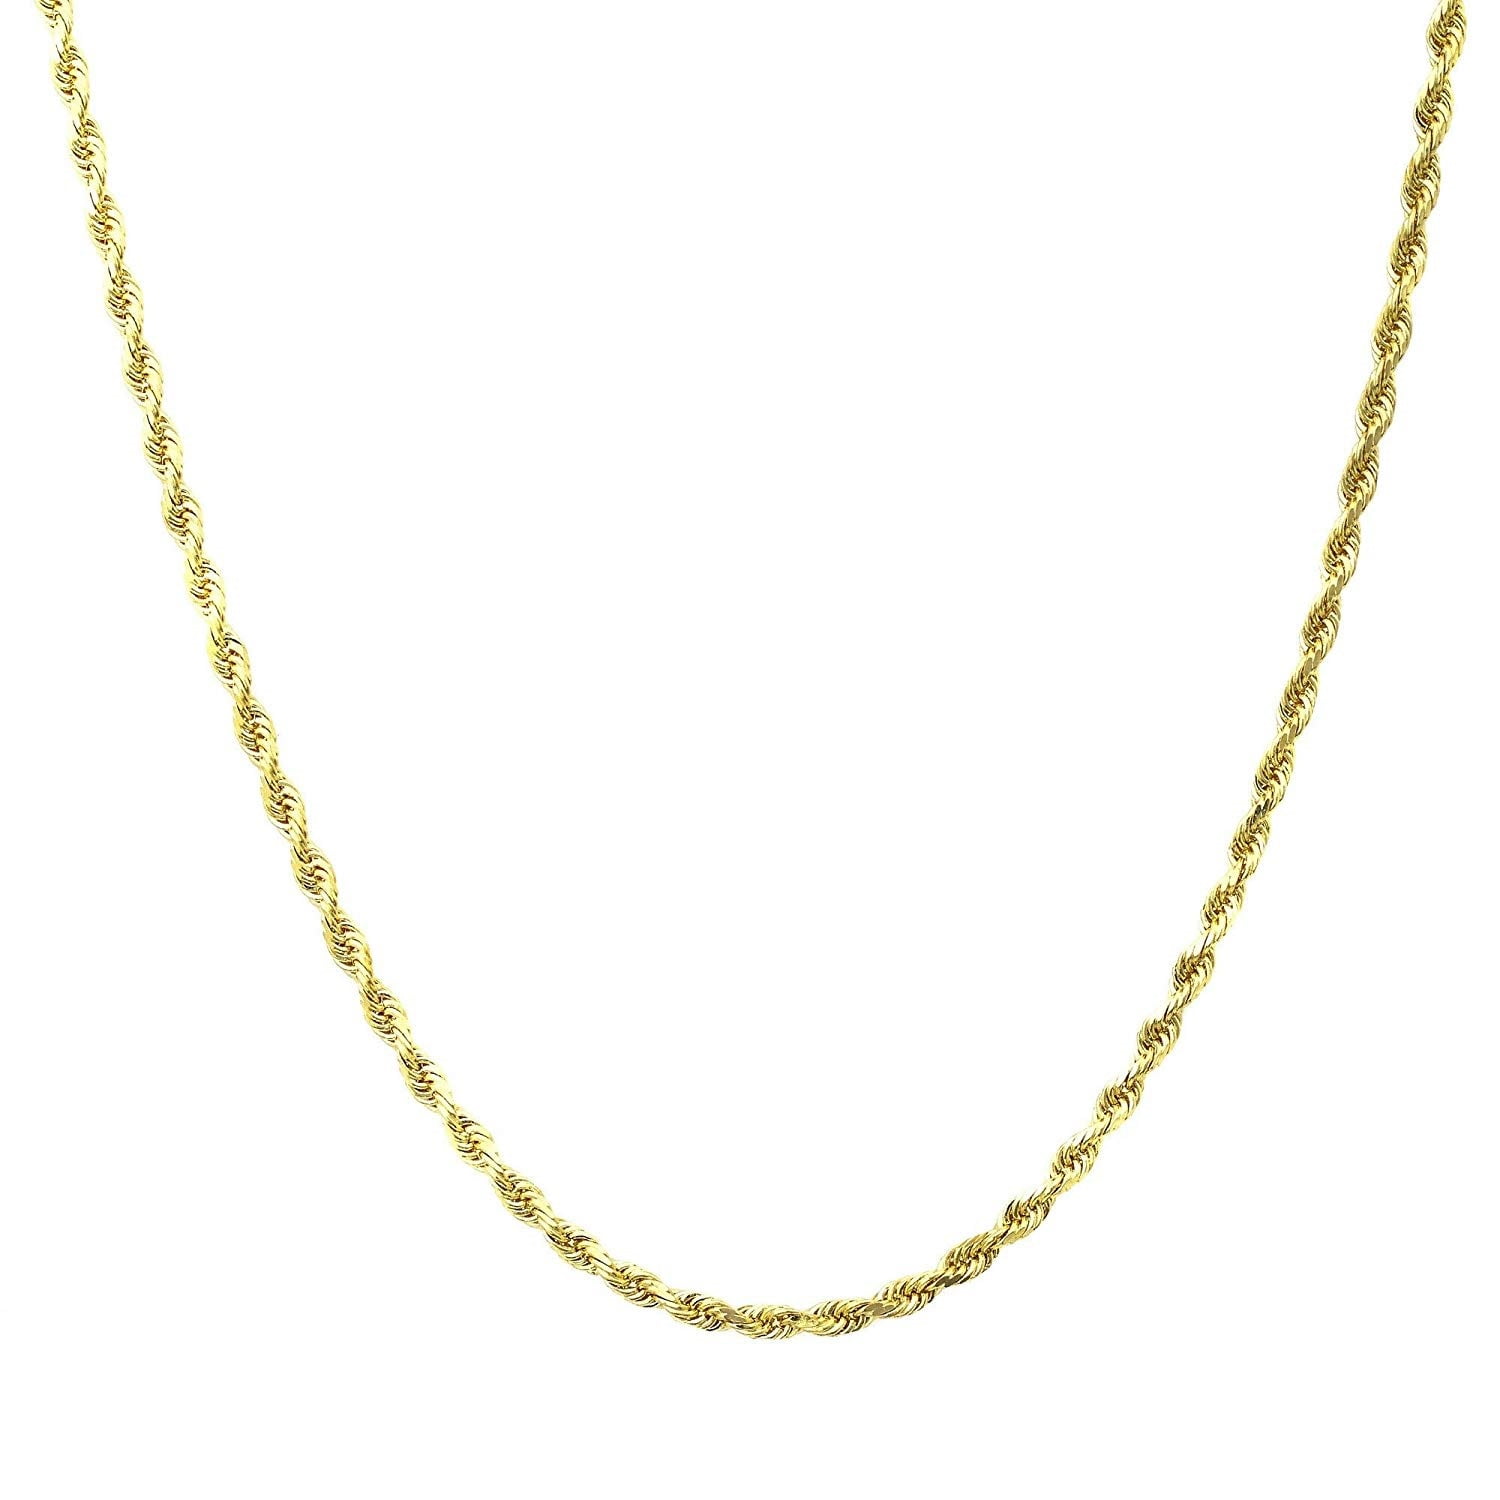 A&M - A&M Women's Solid 14K Yellow Gold Rope Chain 18" Necklace